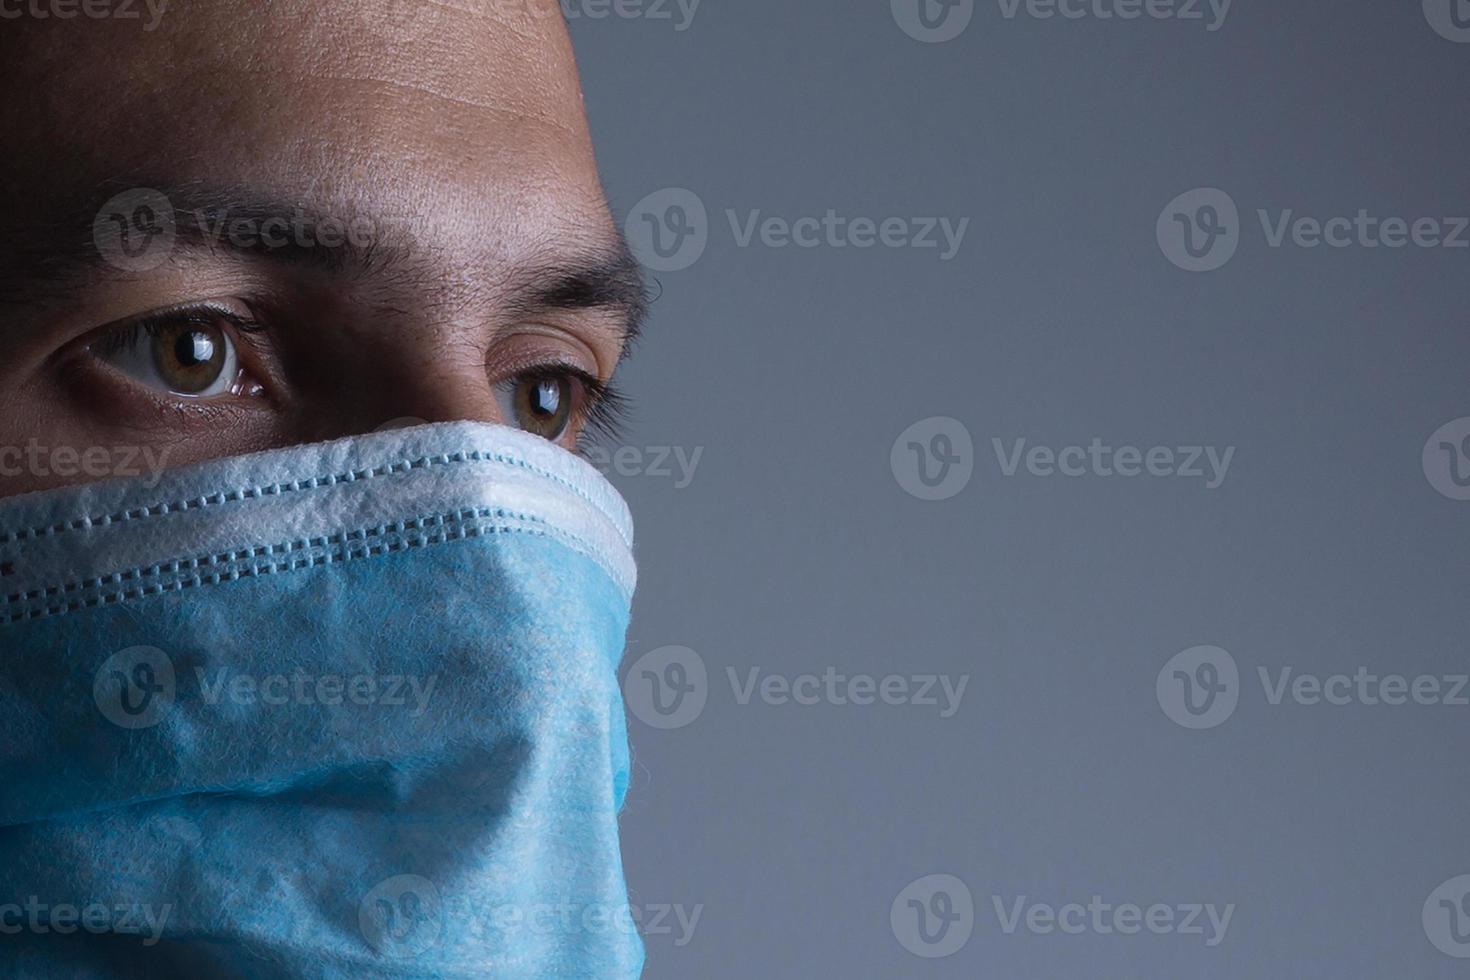 Strong man wearing mask to prevent flu virus and dust air pollution on white background photo